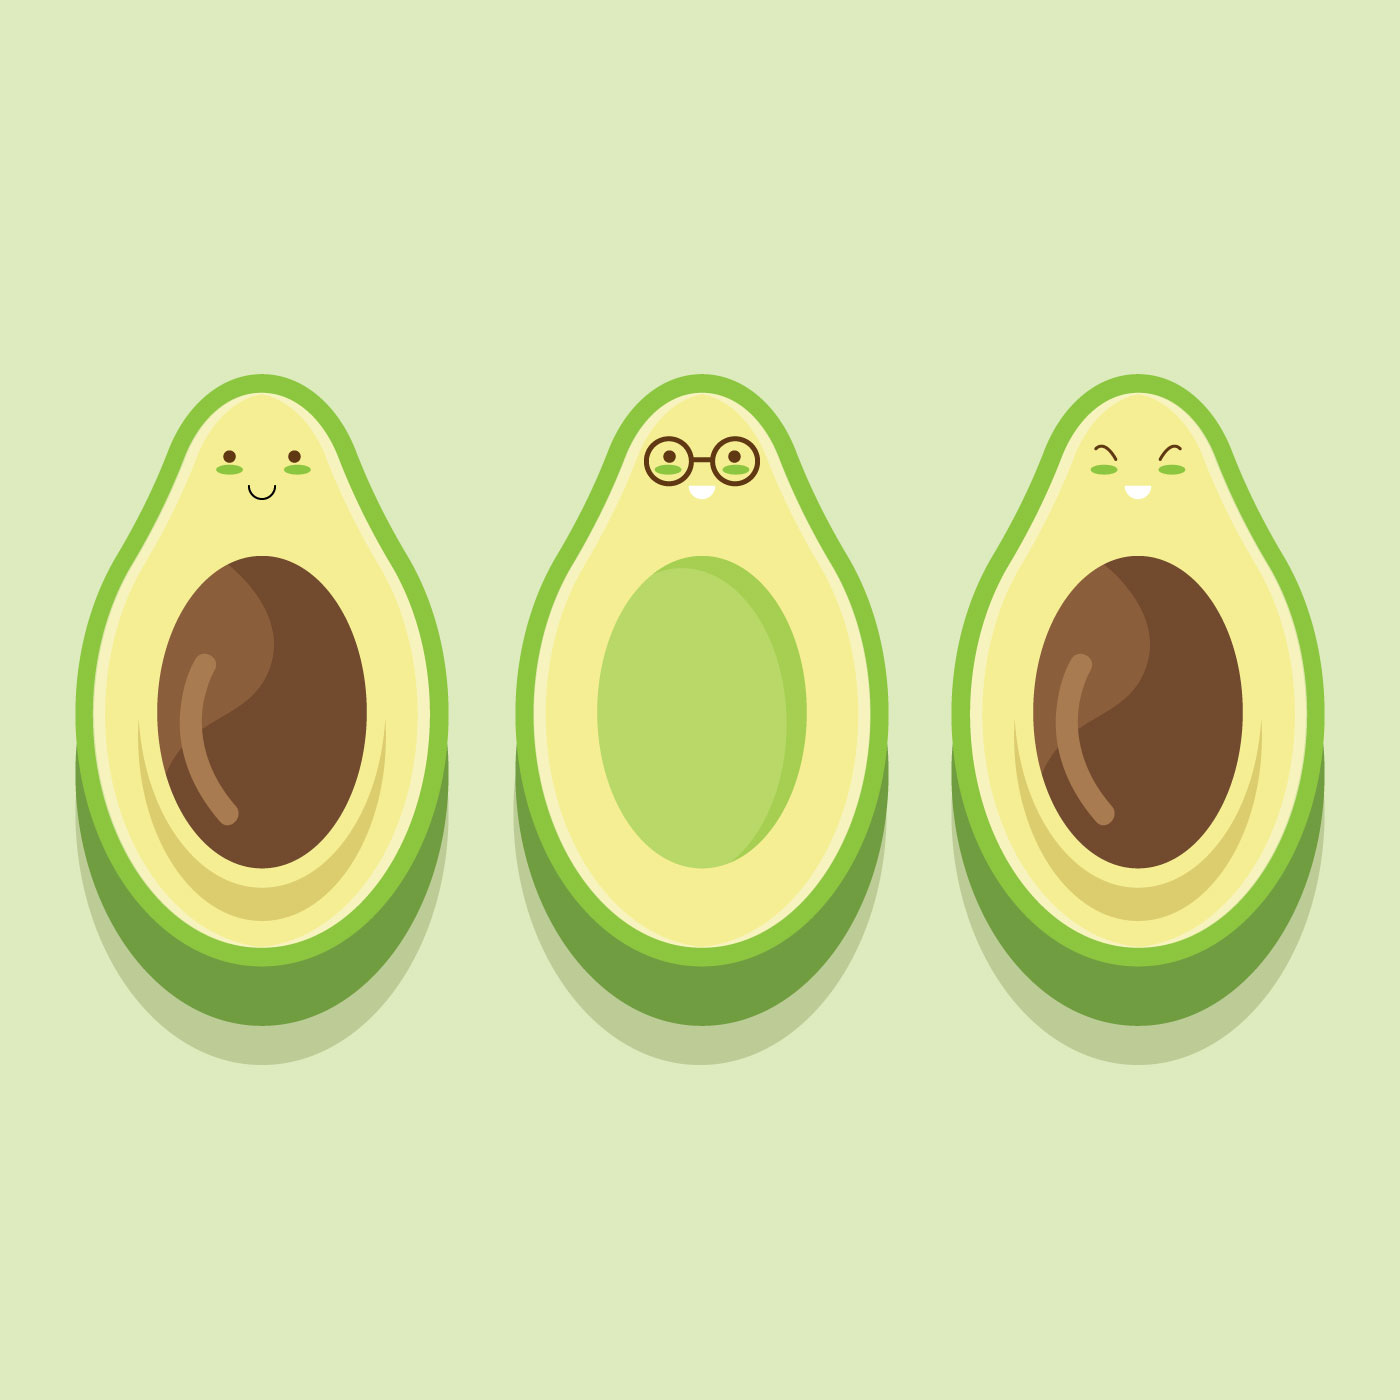 Download Cute Avocado Character Vector for free.